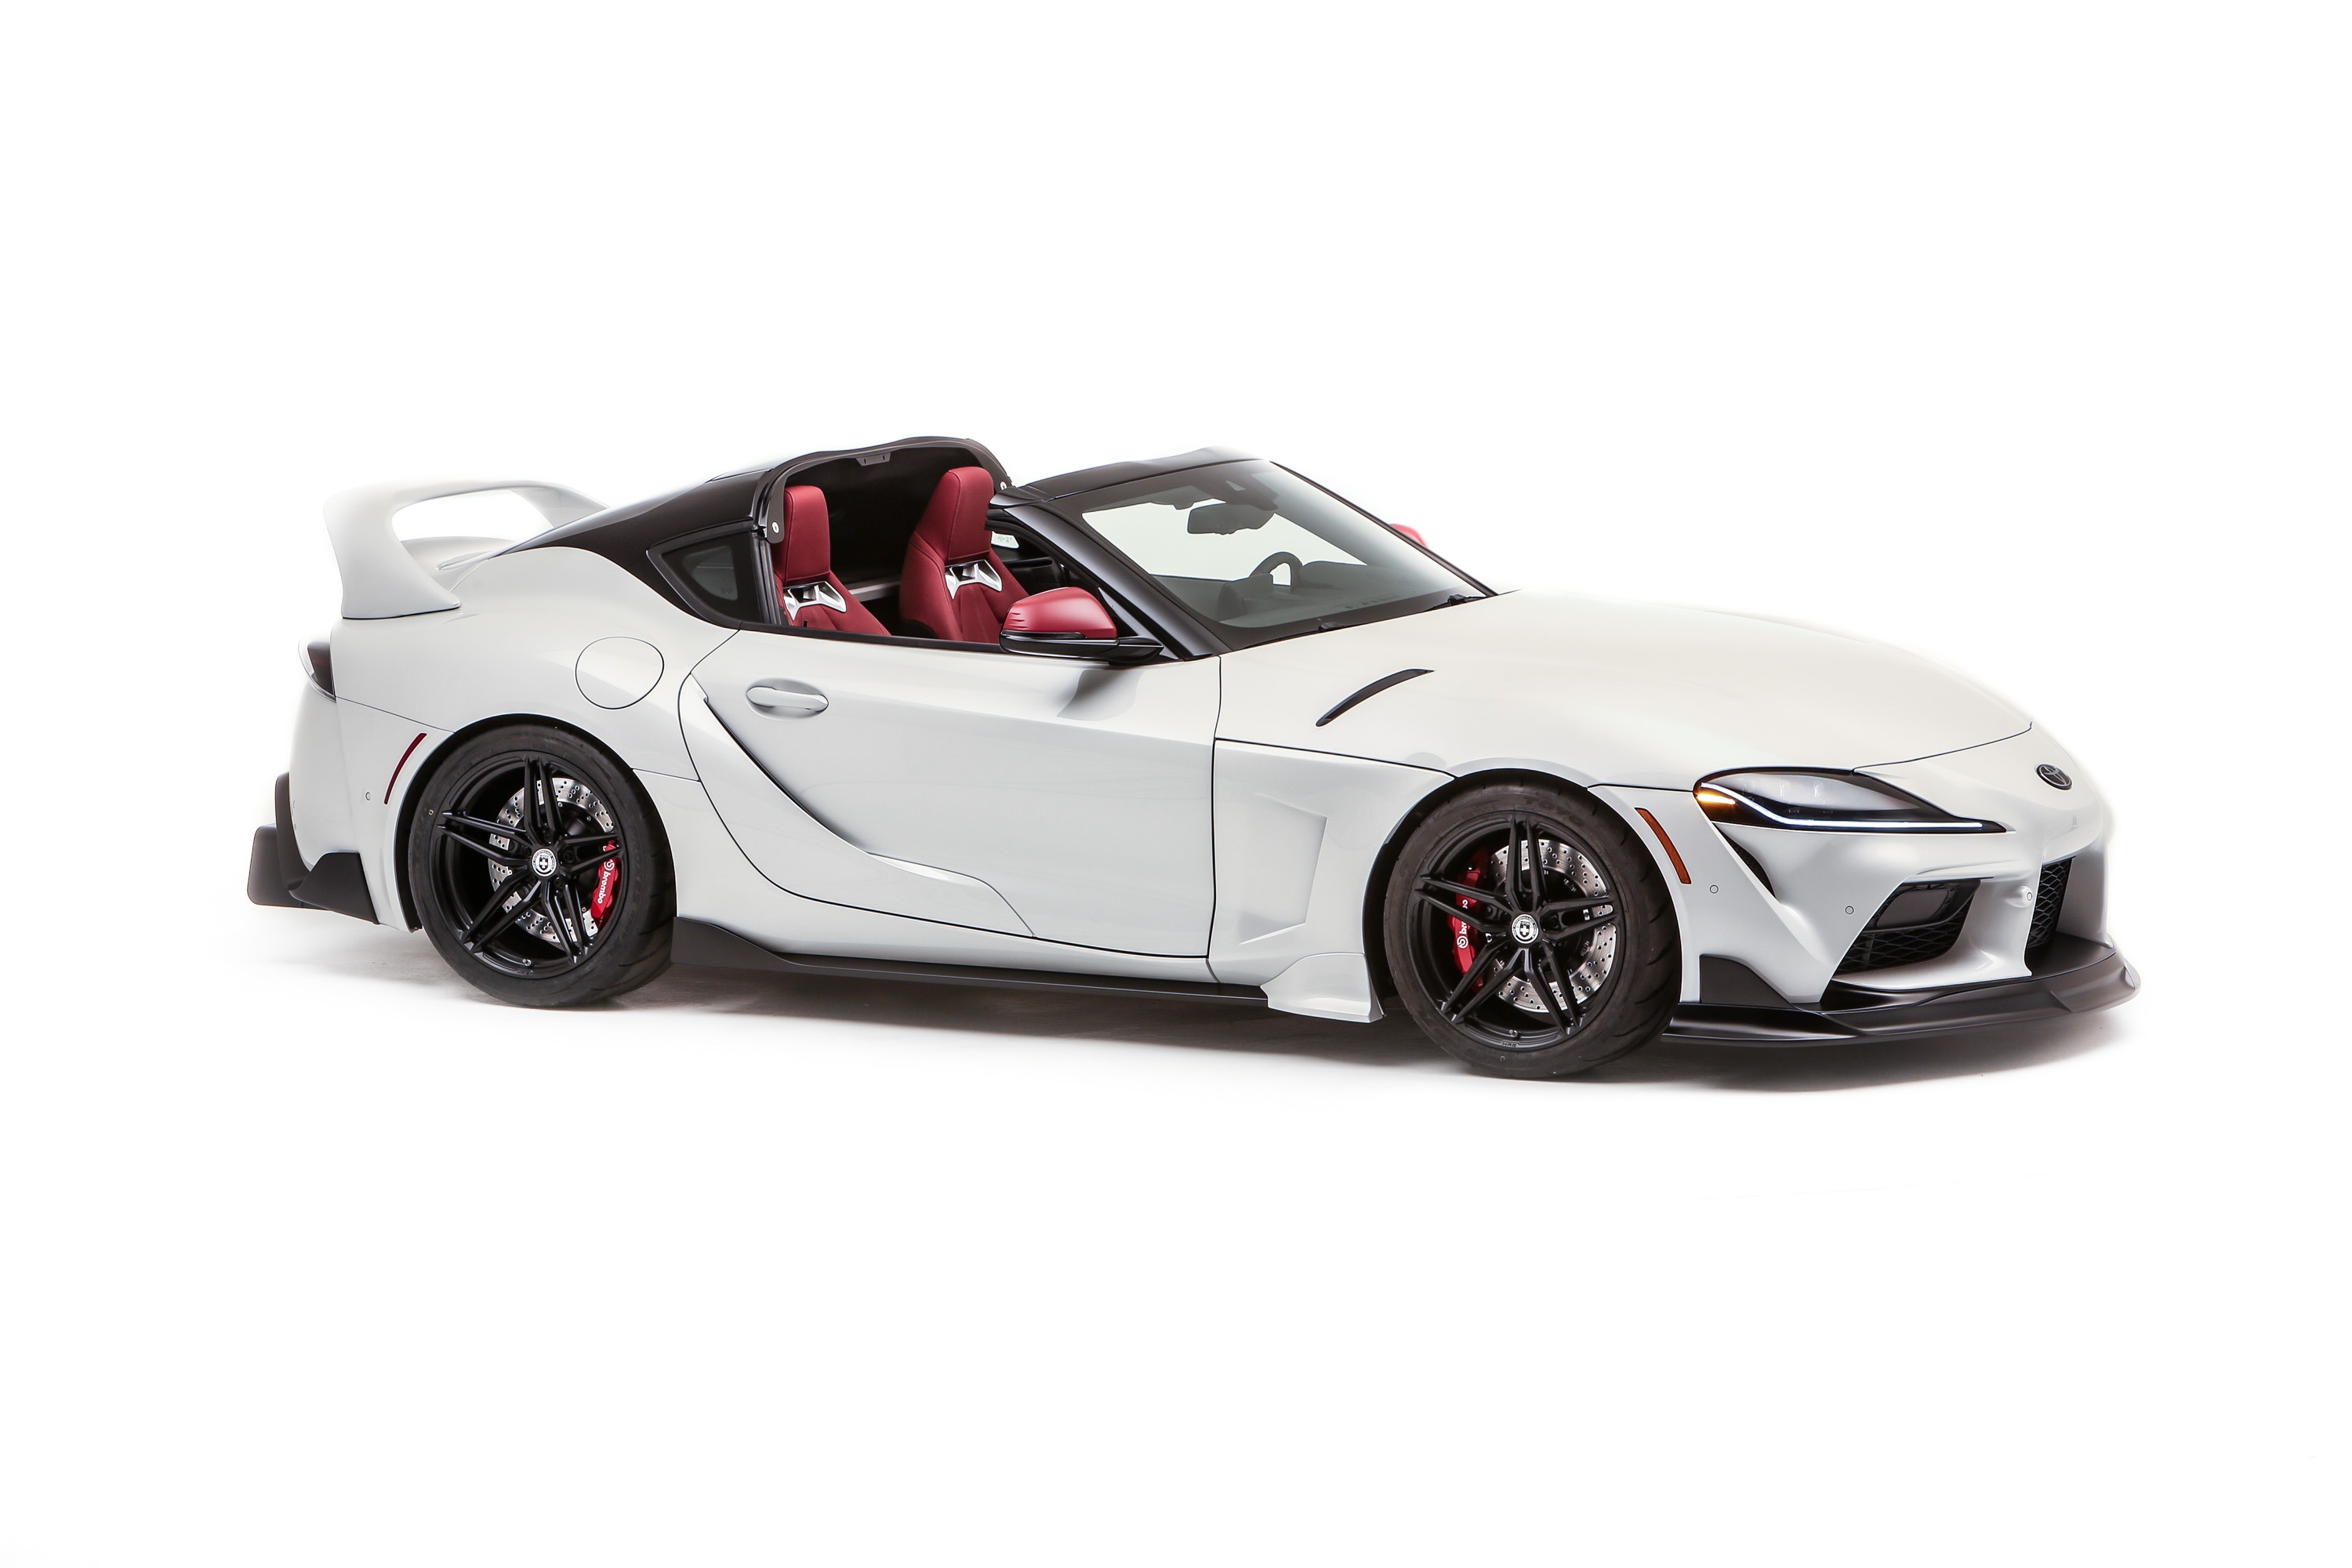 GR Supra Sport Top Blows the Roof Off the Competition USA Newsroom